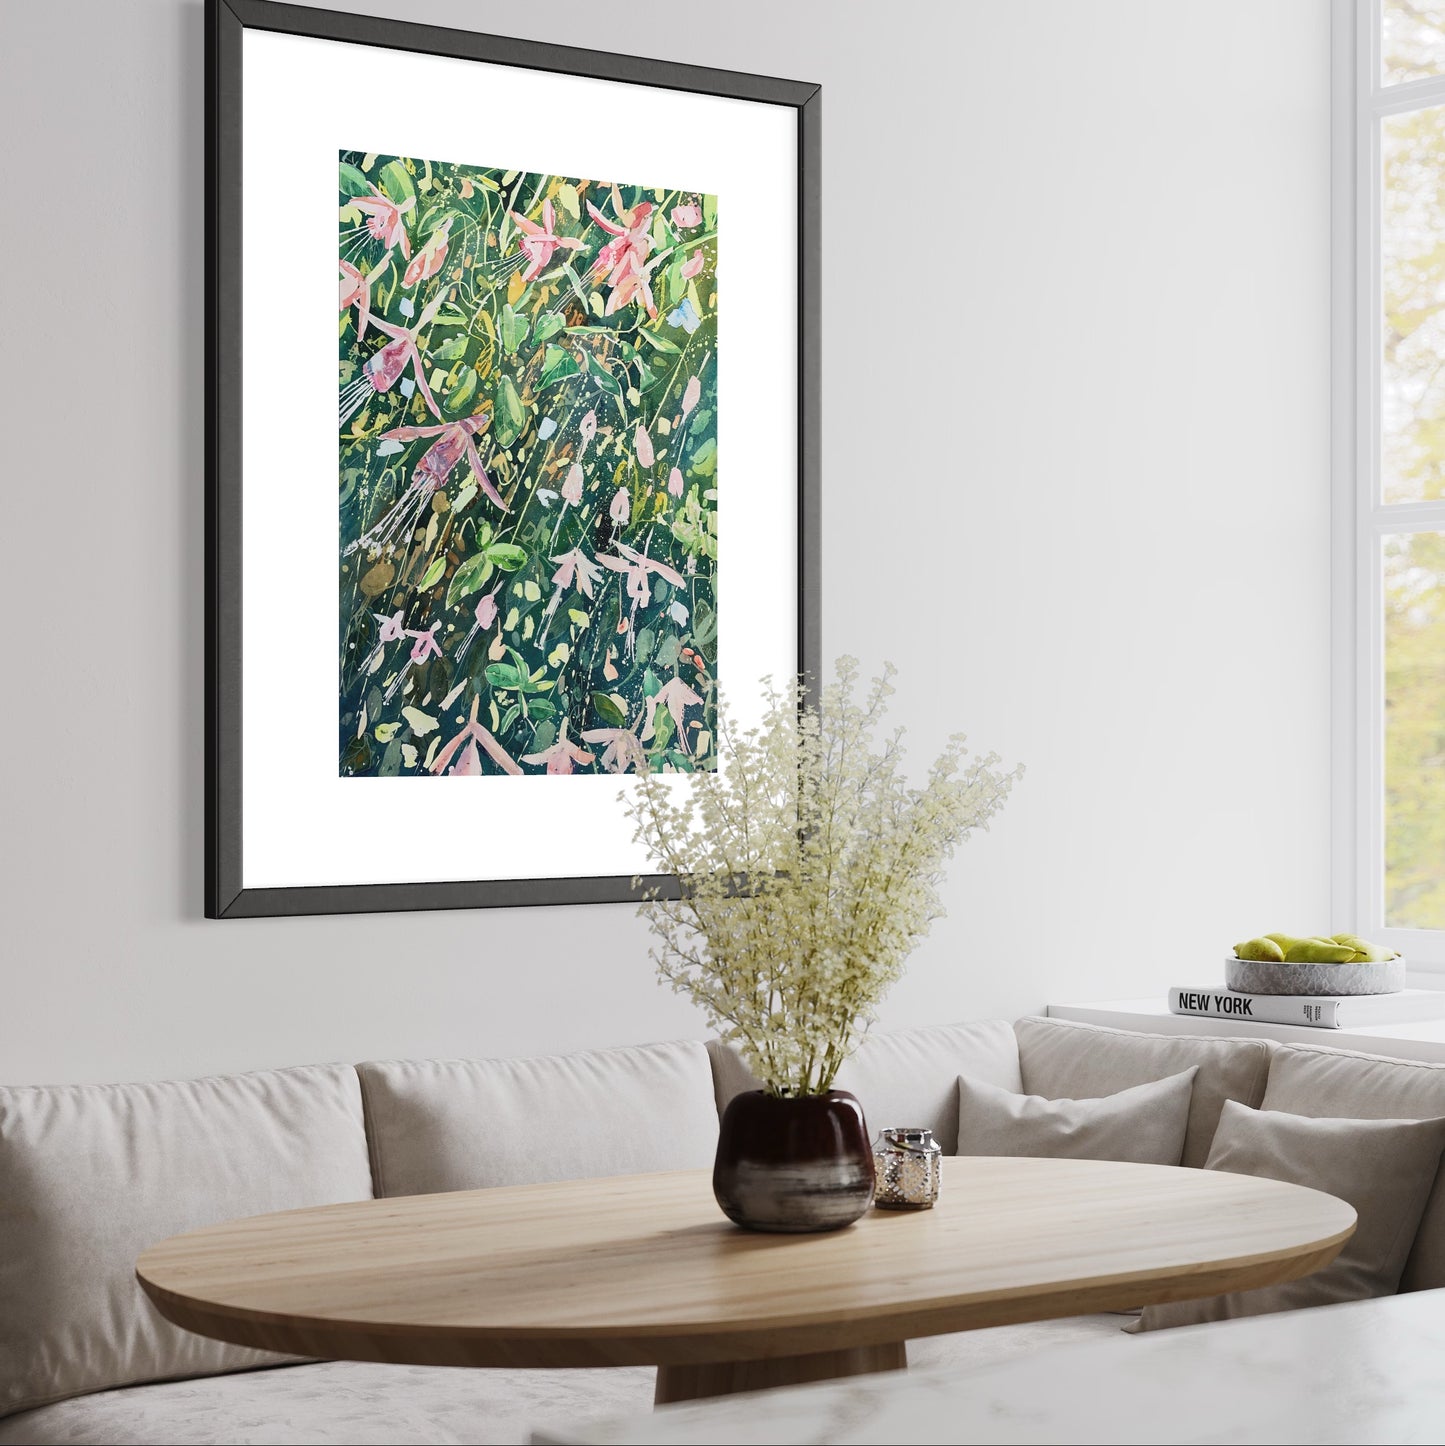 Moment of Flowers (Original, Signed and Framed)